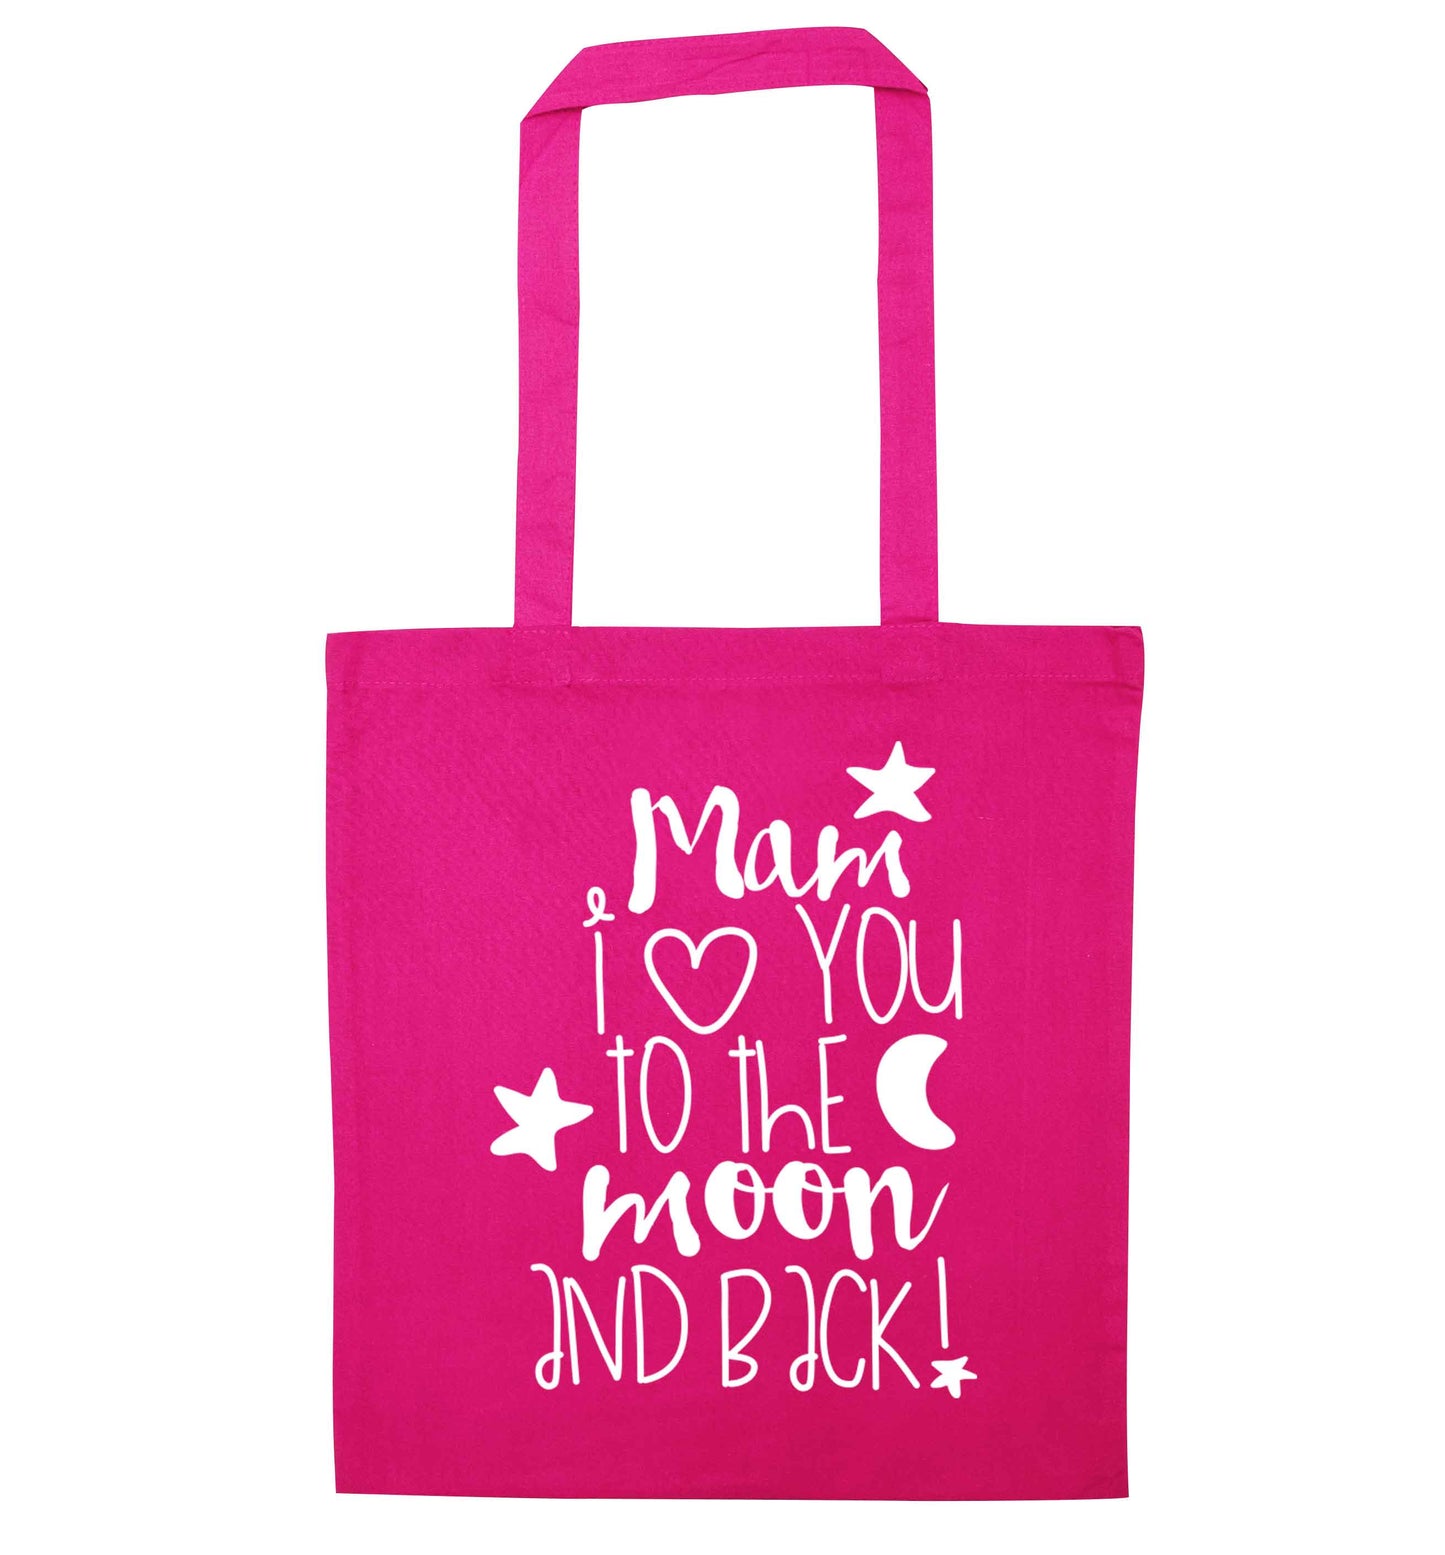 Mam I love you to the moon and back pink tote bag